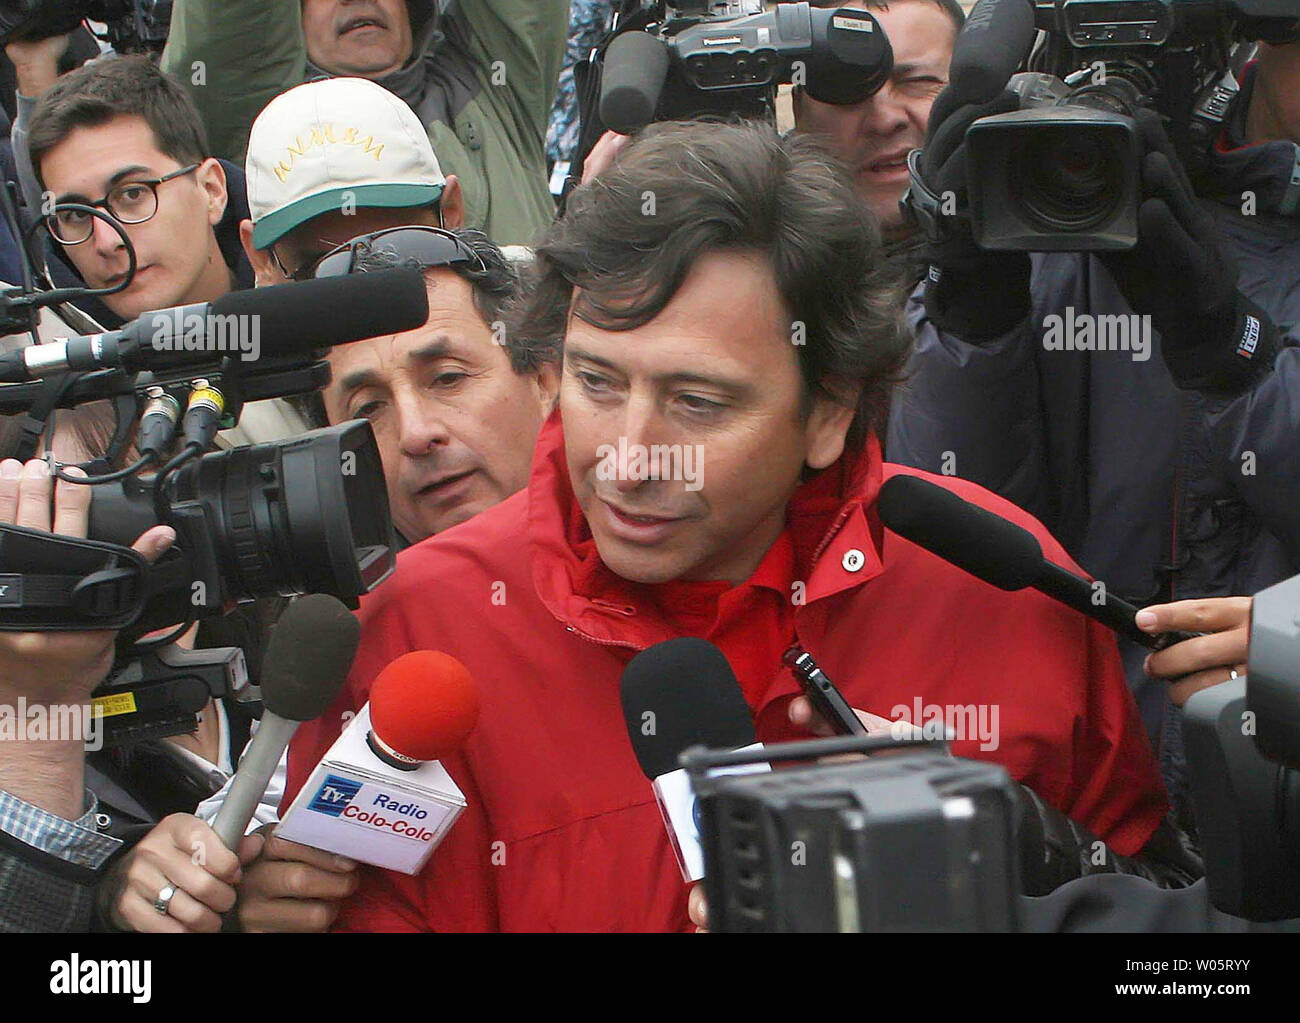 Chilean Mining Minister Laurence Golborne walks through Camp Hope as preparations continue to rescue the 33 trapped miners at San Jose Mine, Chile on October 11, 2010.   If all goes well, officials say the first miners will be brought up in a few days via a 20-minute ride in a rescue capsule more than 2,000 feet below the surface.   The miners have been trapped for more than two months.   UPI/Sebastian Padilla Stock Photo